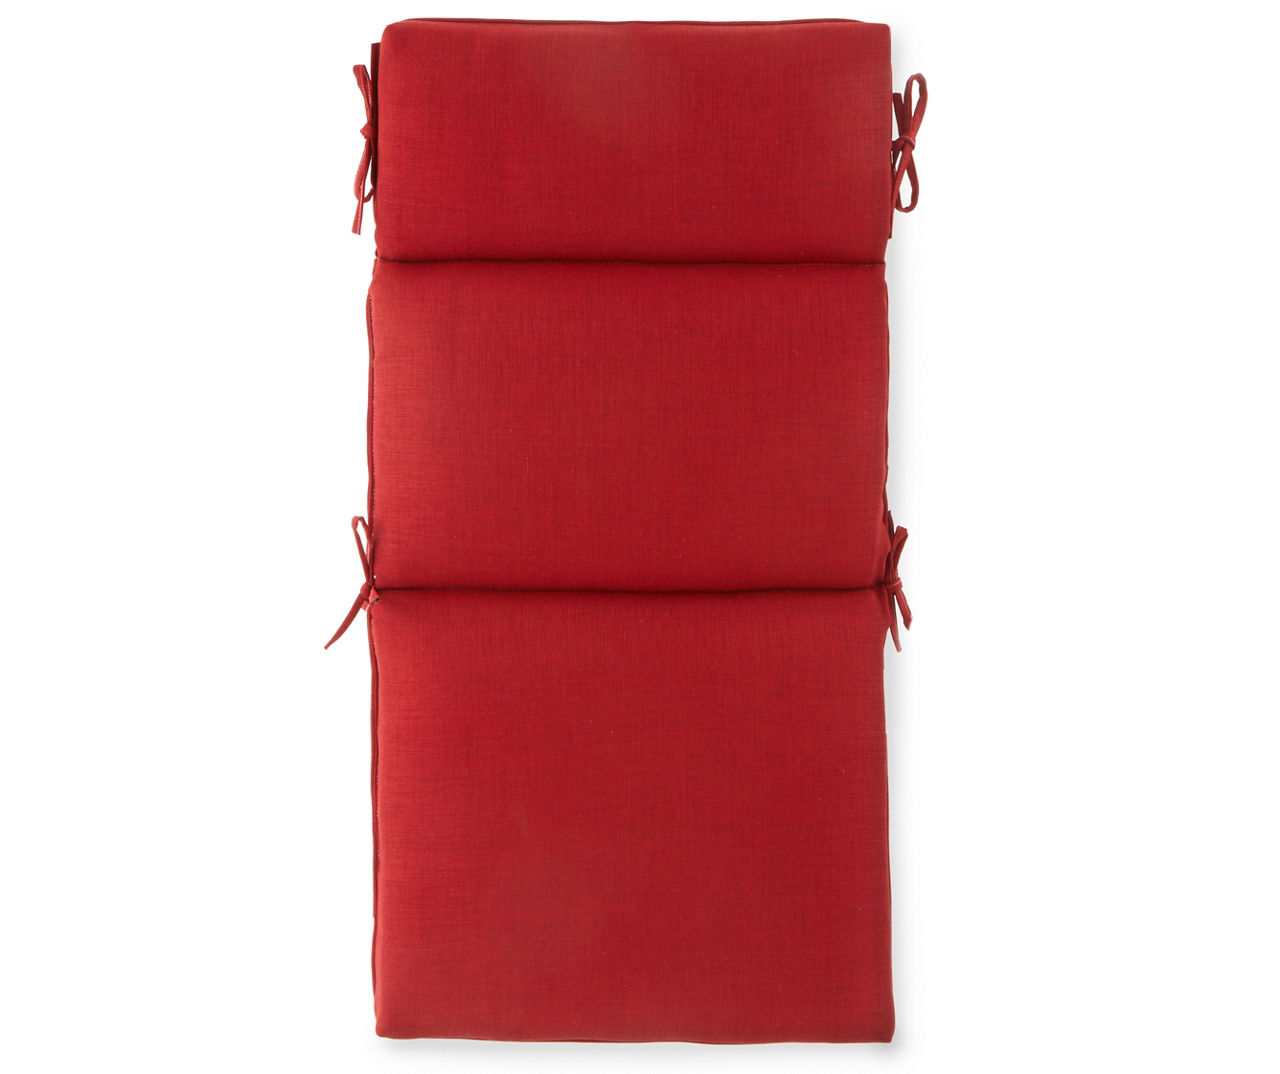 Rave Red Premium Outdoor Chair Cushion